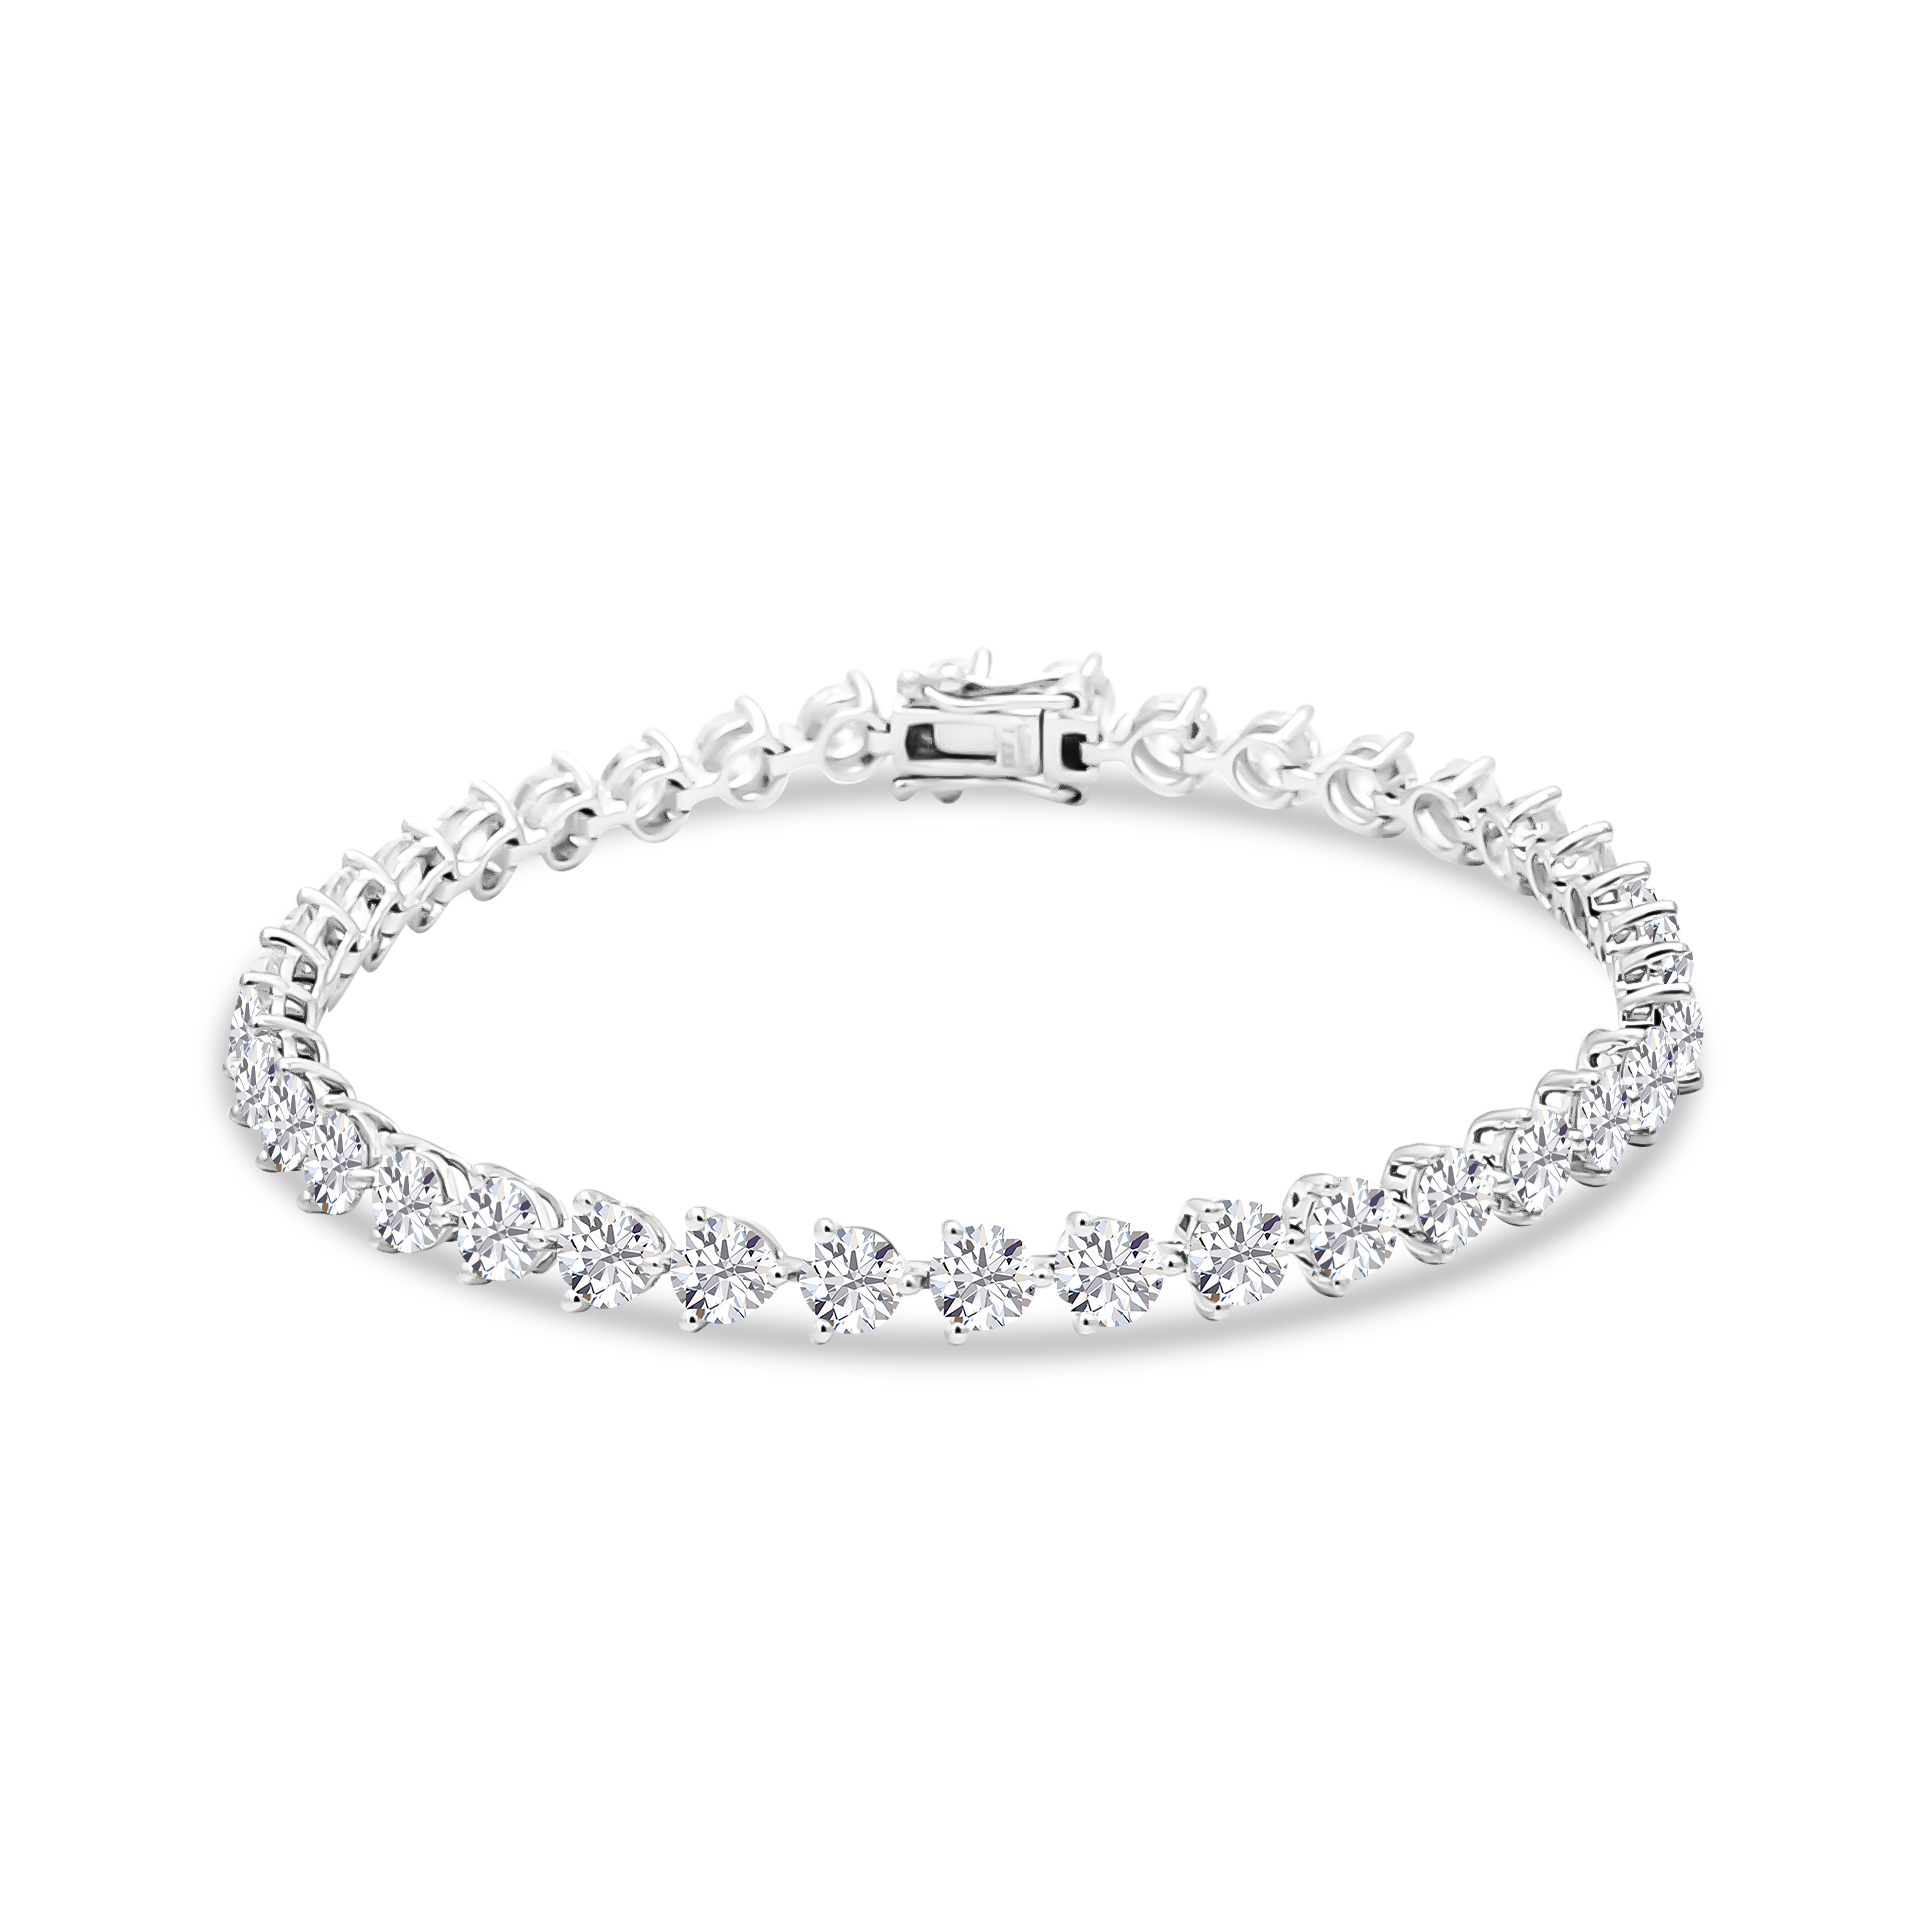 Buy 11.74ctw Natural Diamond Tennis Bracelet White Gold D-E-F Color SI1 SI2  watch Video LDG Online in India - Etsy